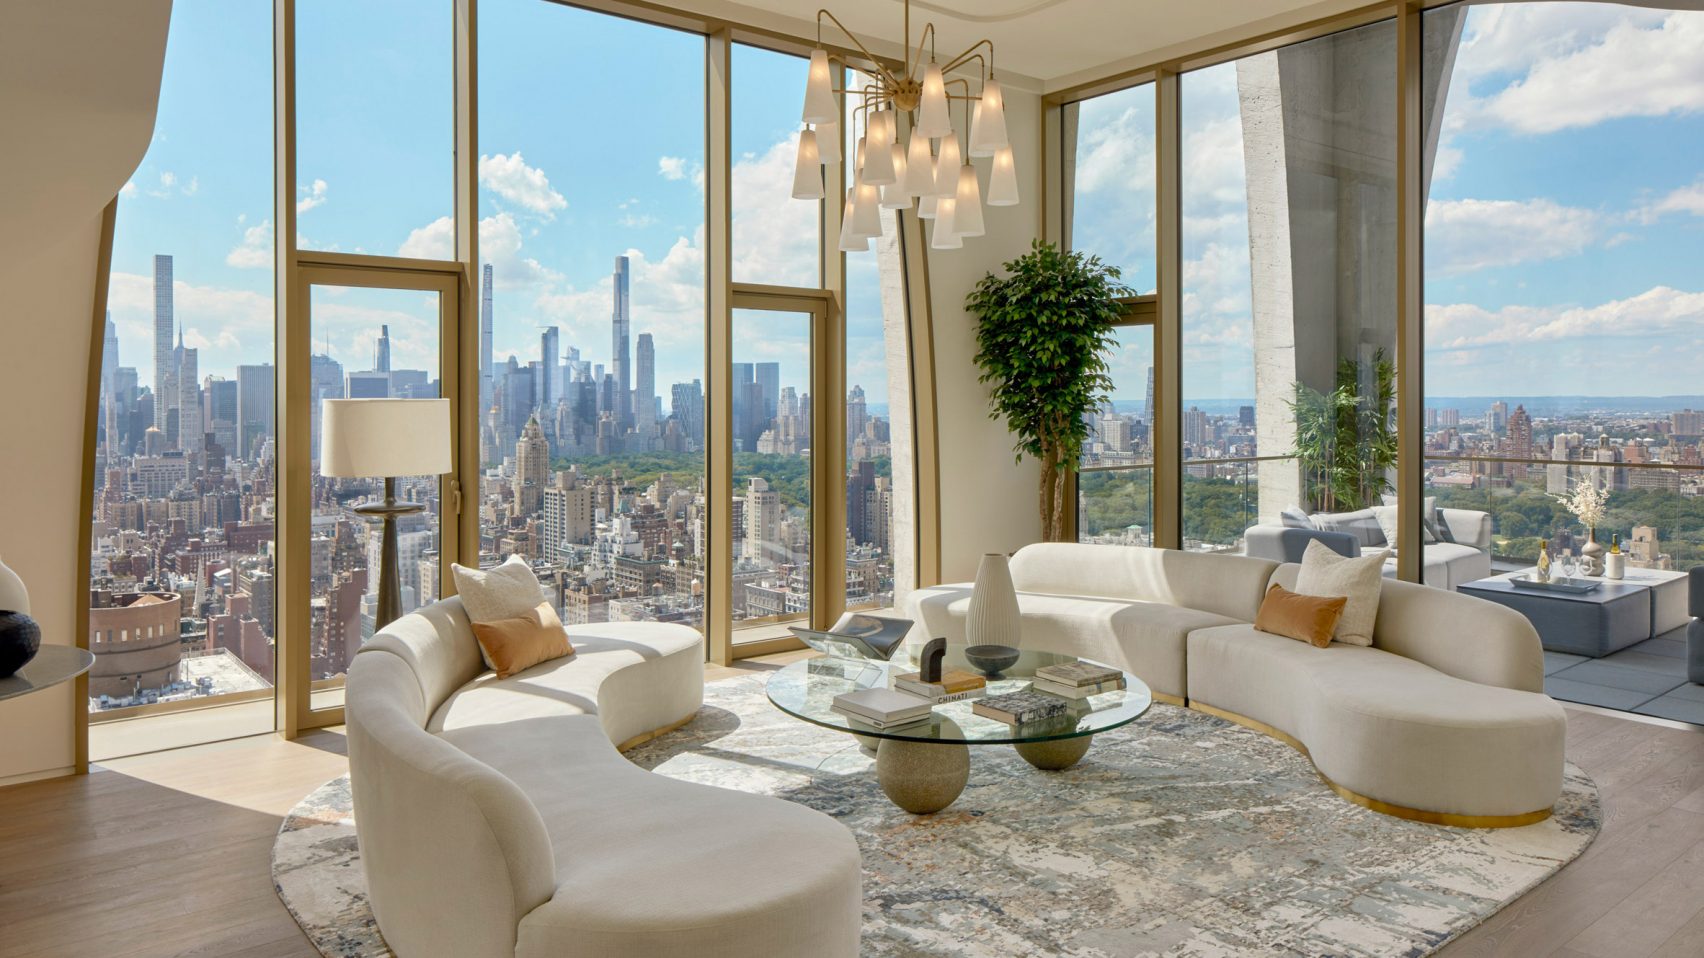 Modern Luxury Redefined – A Tour of a New York Art Deco Penthouse